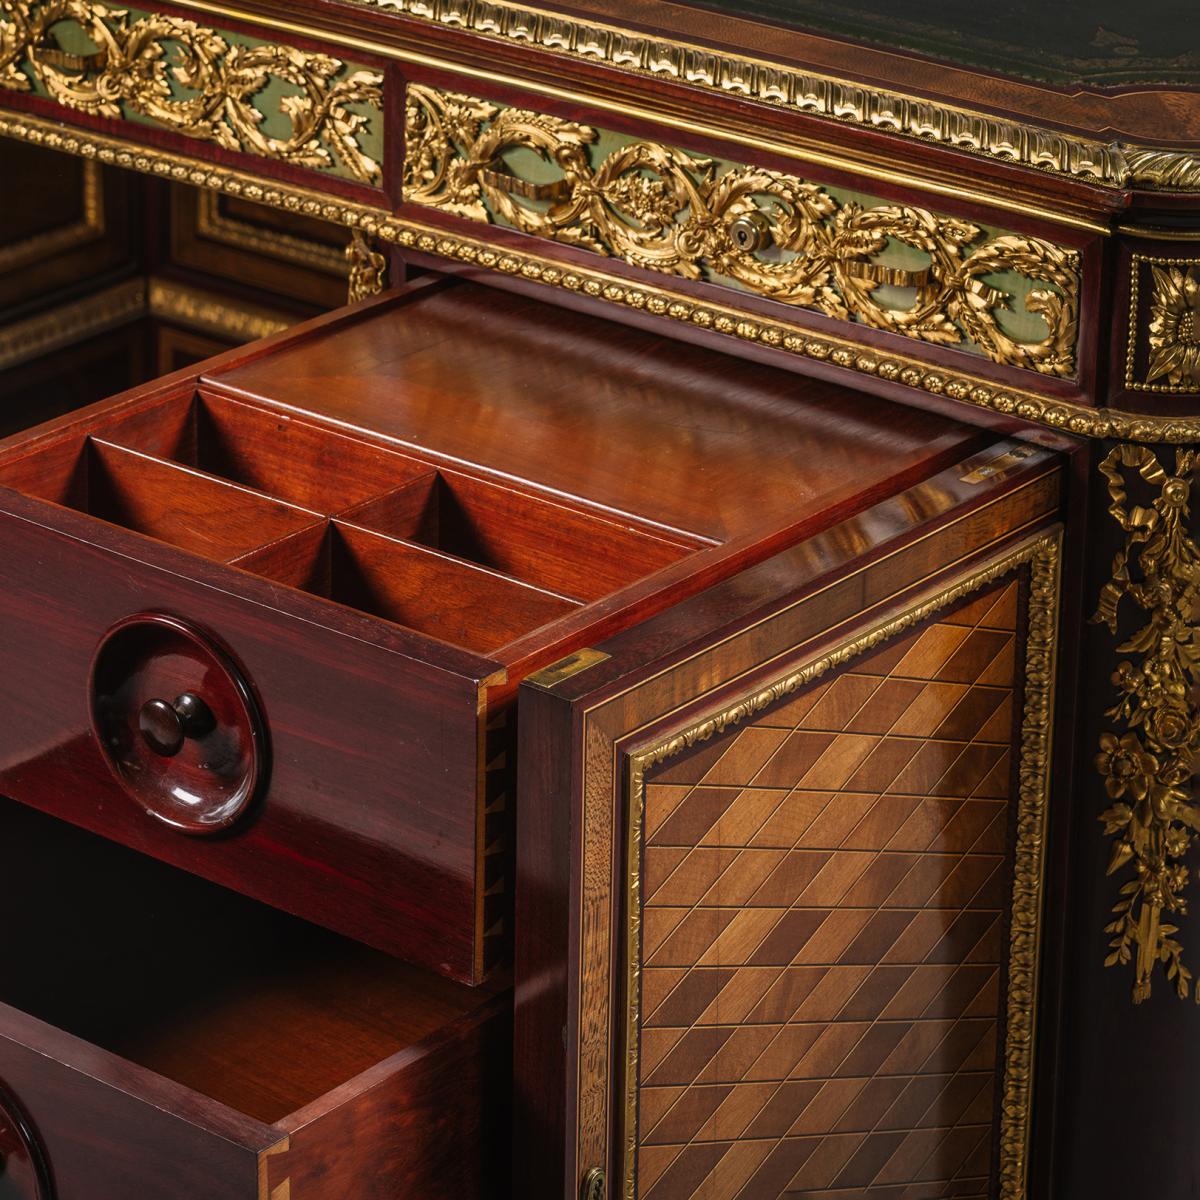 An Important Napoleon III Gilt-Bronze Mounted Parquetry Pedestal Desk, By Guillaume Grohé